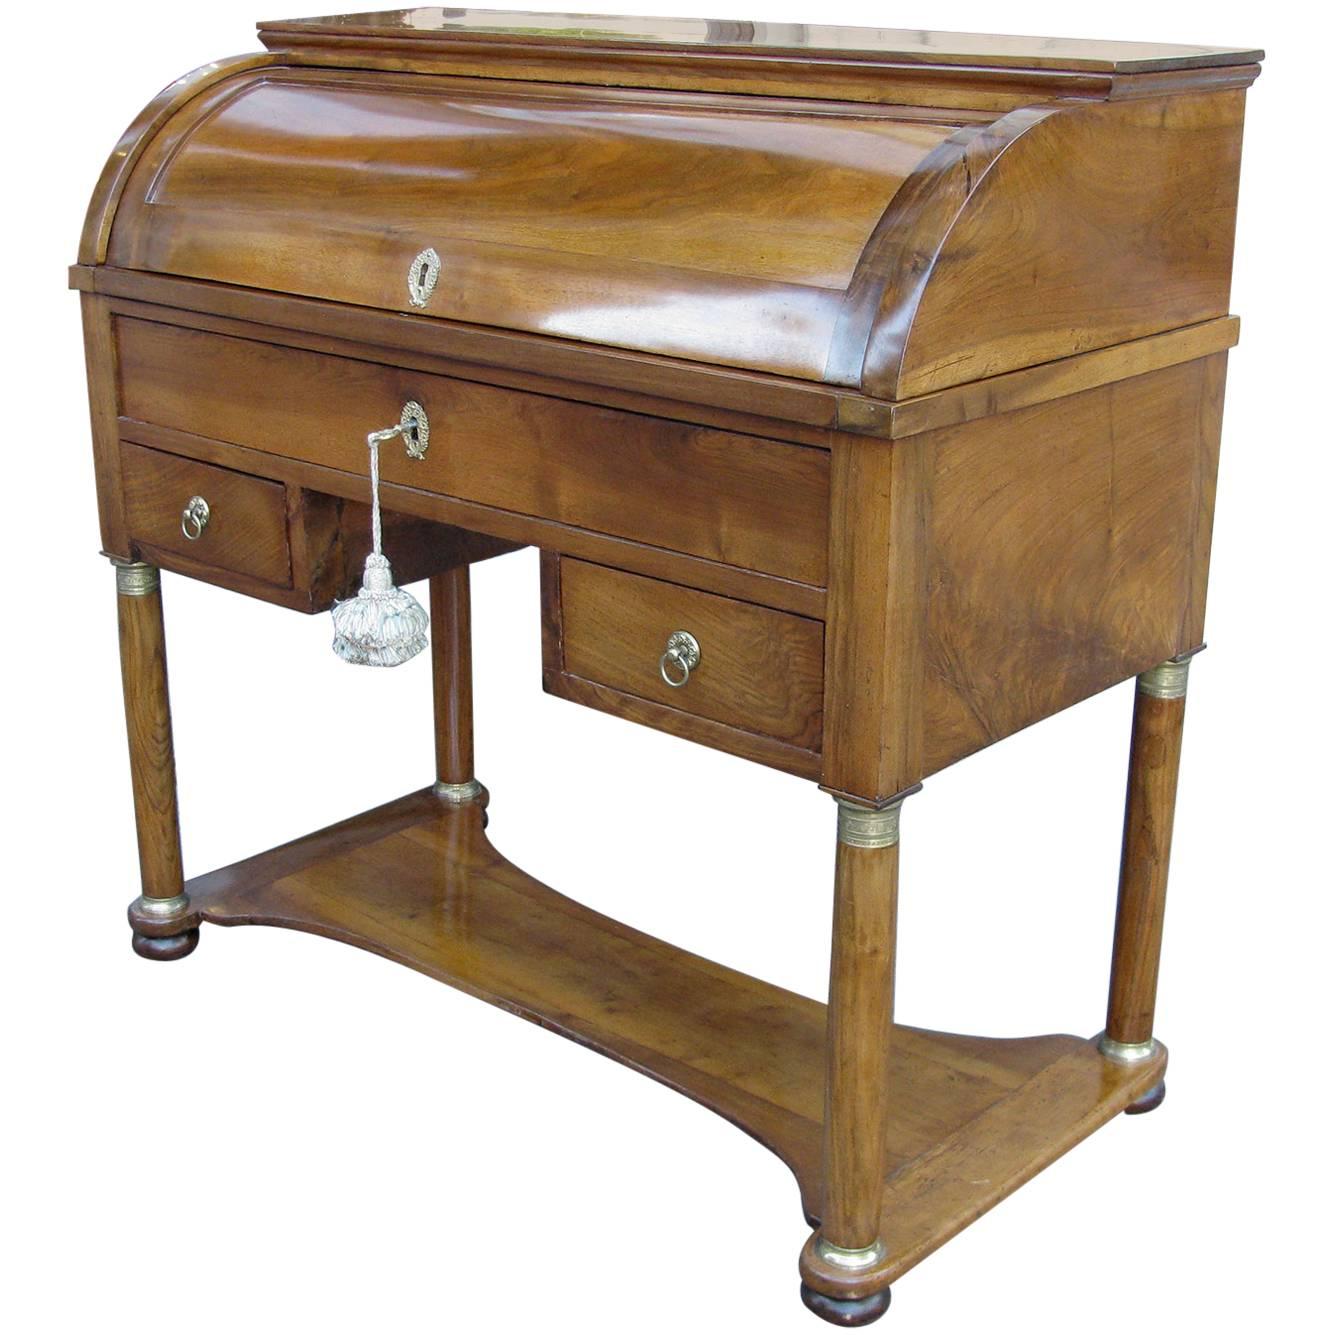 An early 19th century Empire walnut bureau of Italian origin. A cylinder front, opening to reveal an arrangement of small drawers and compartments, below a pull-out writing leaf, a large useful drawer and a knee hole flanked by drawers decorated